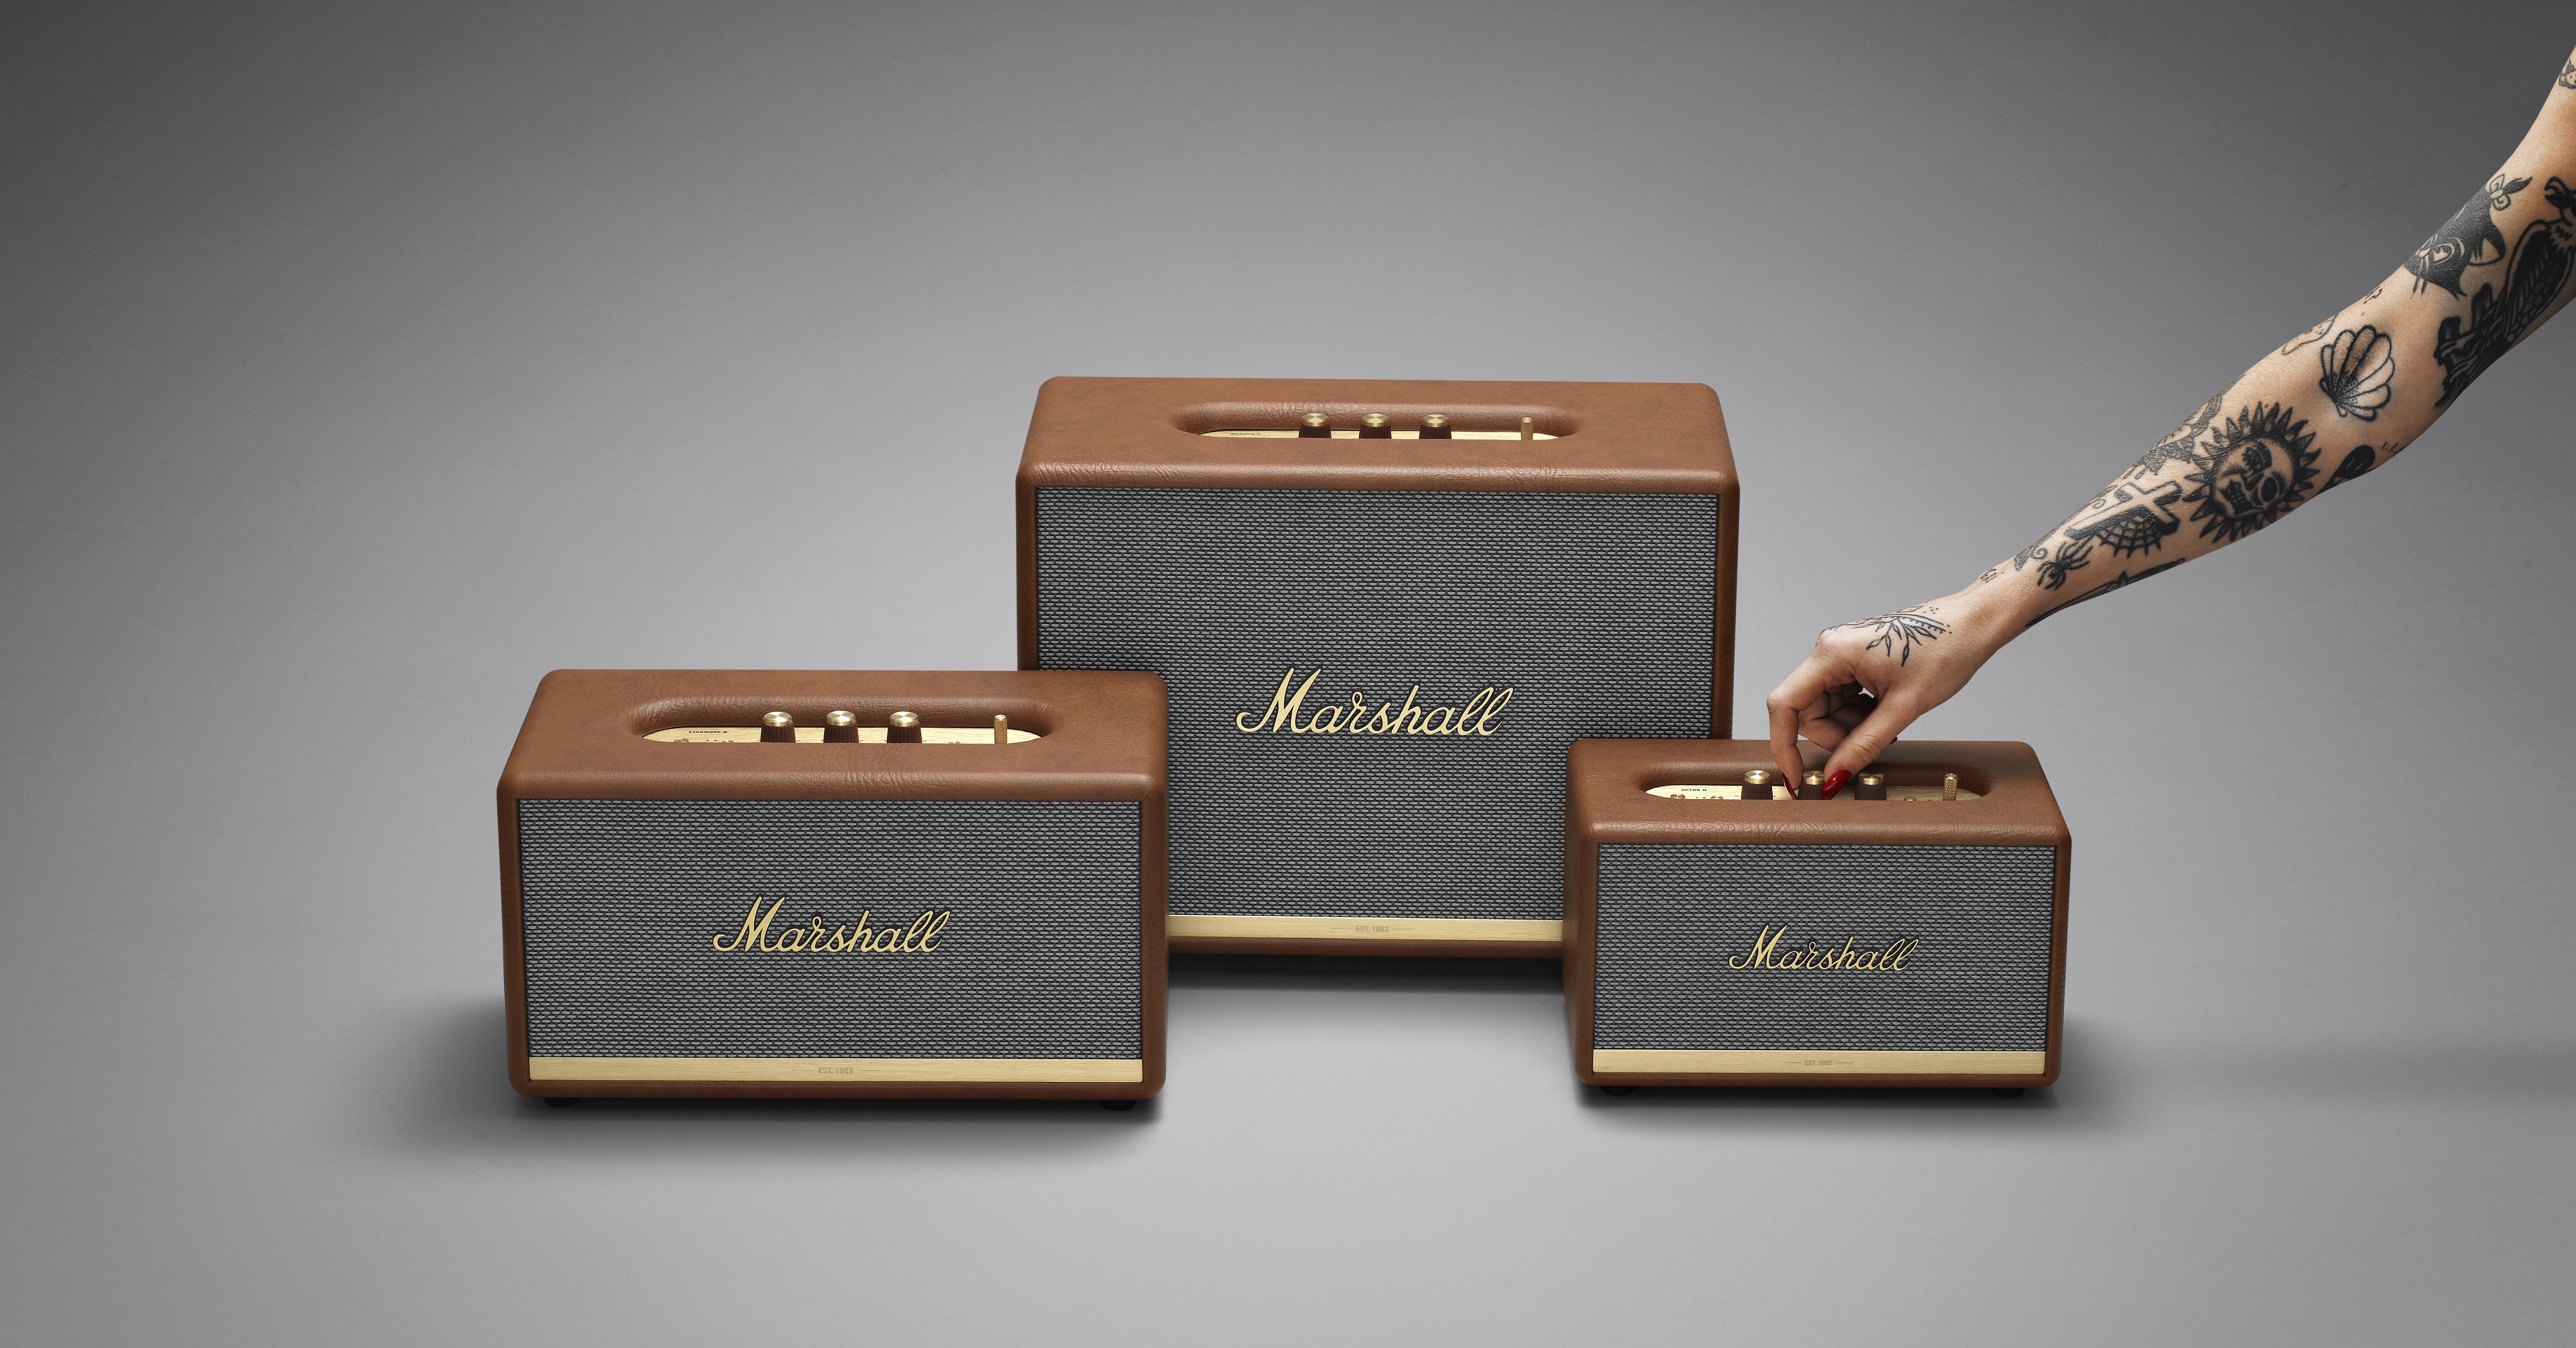 Marshall Bluetooth speakers get a refresh